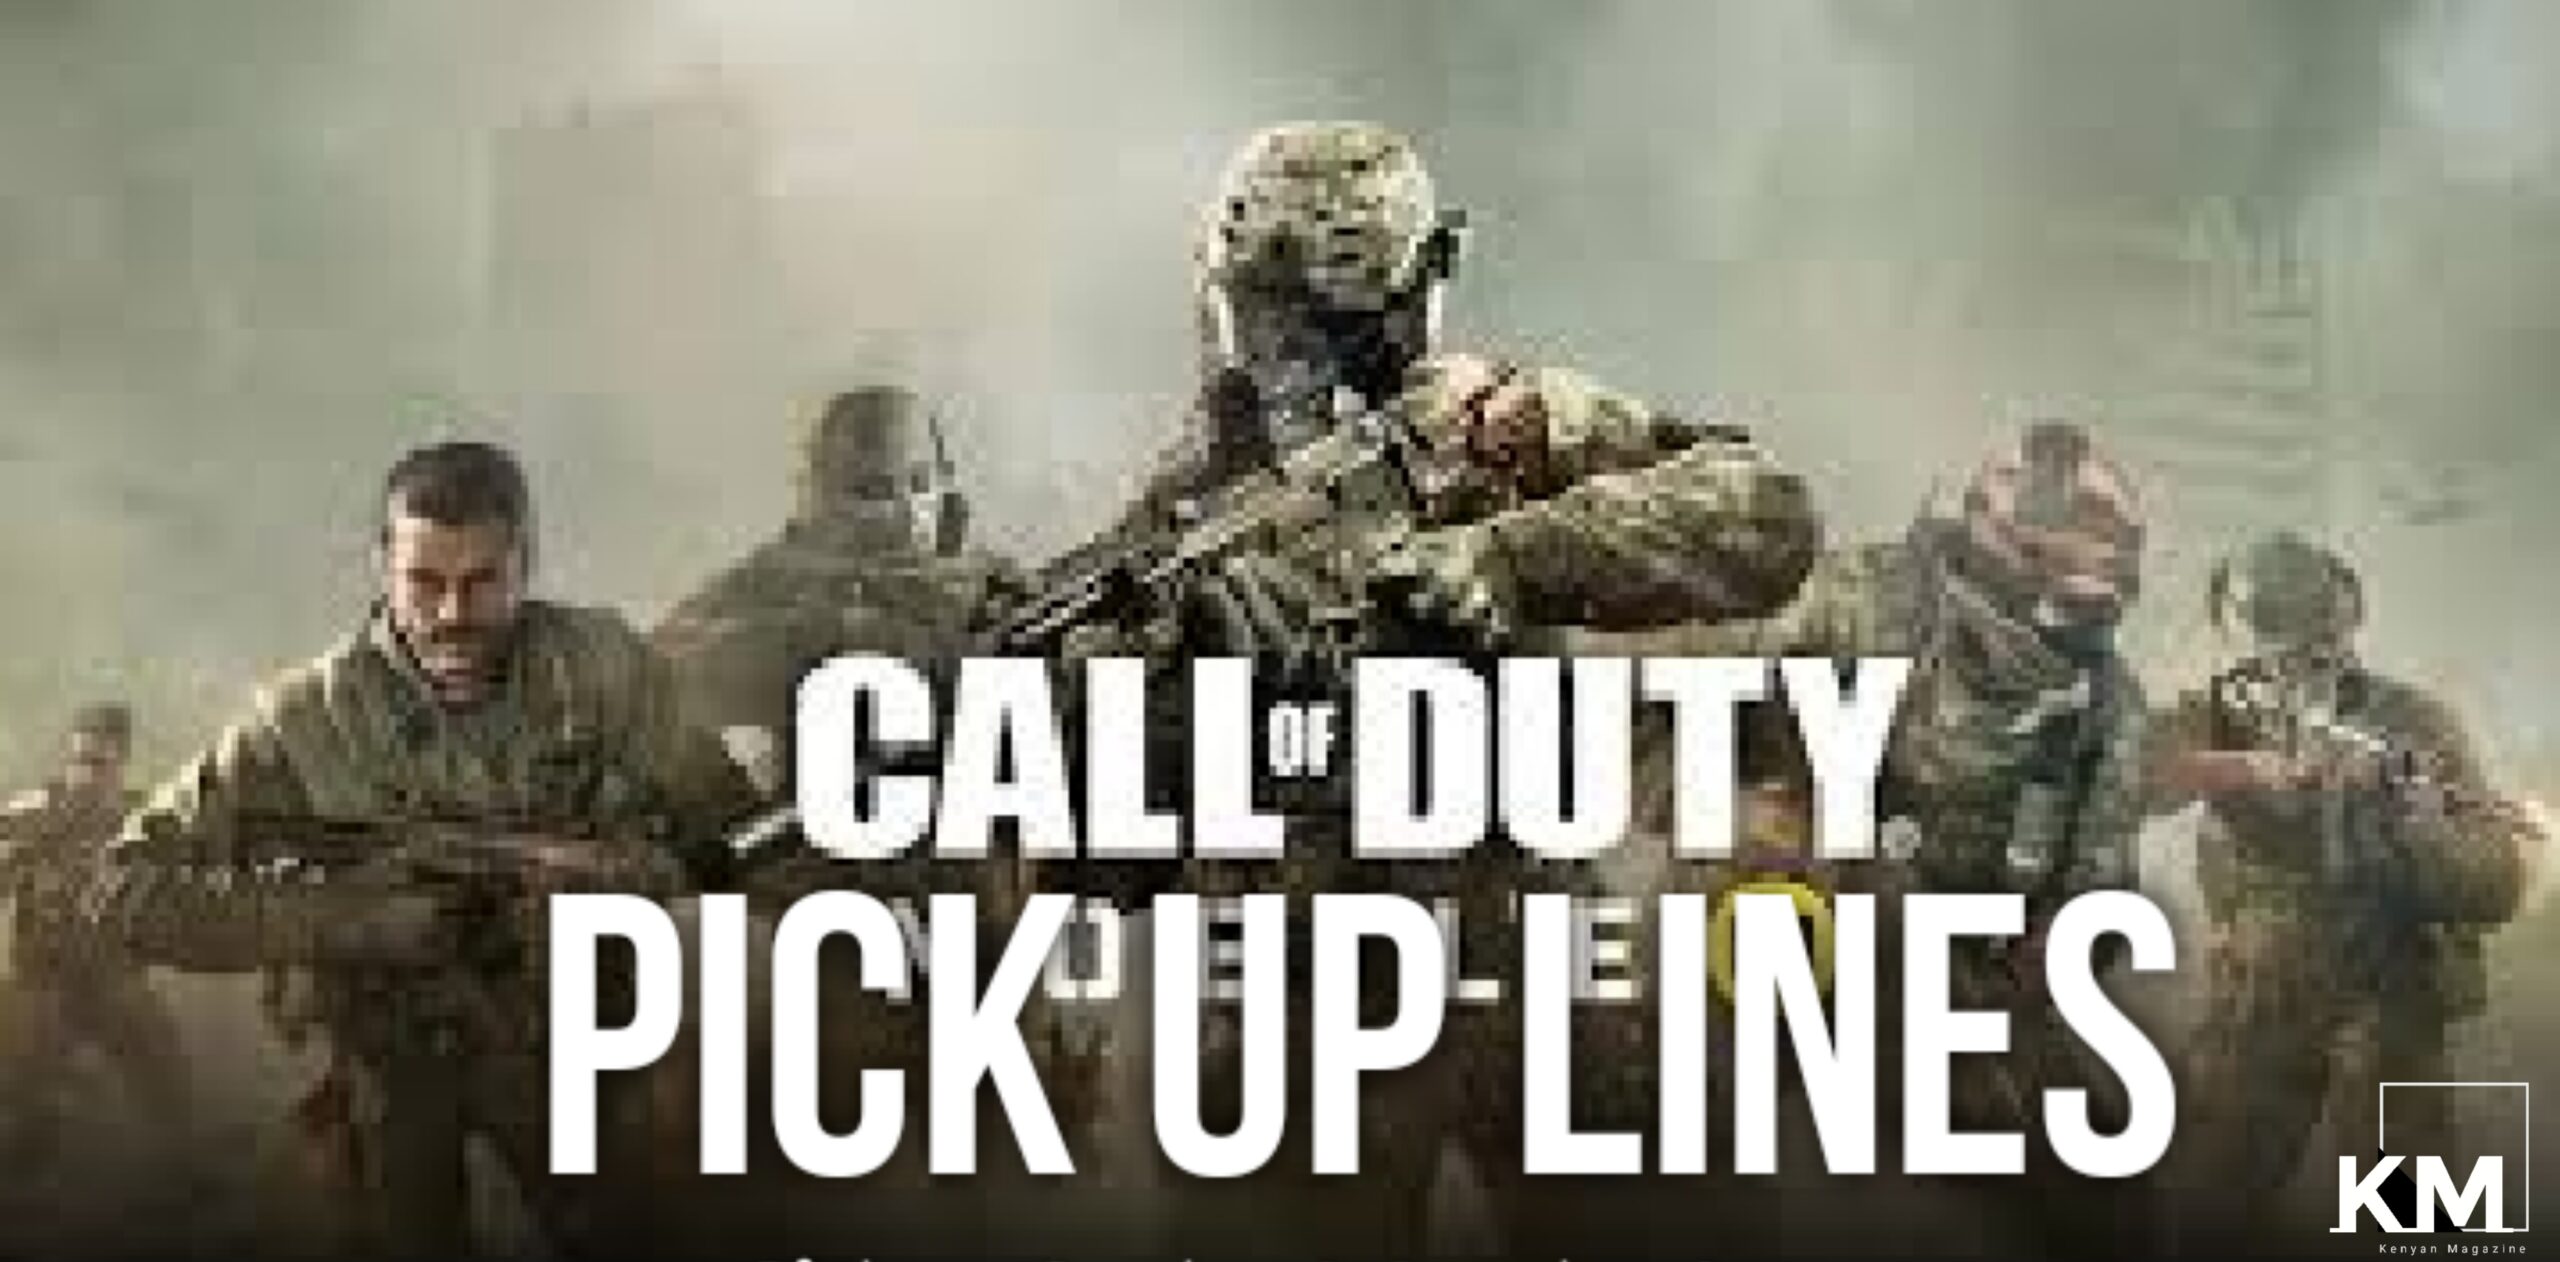 Call of duty pick up lines